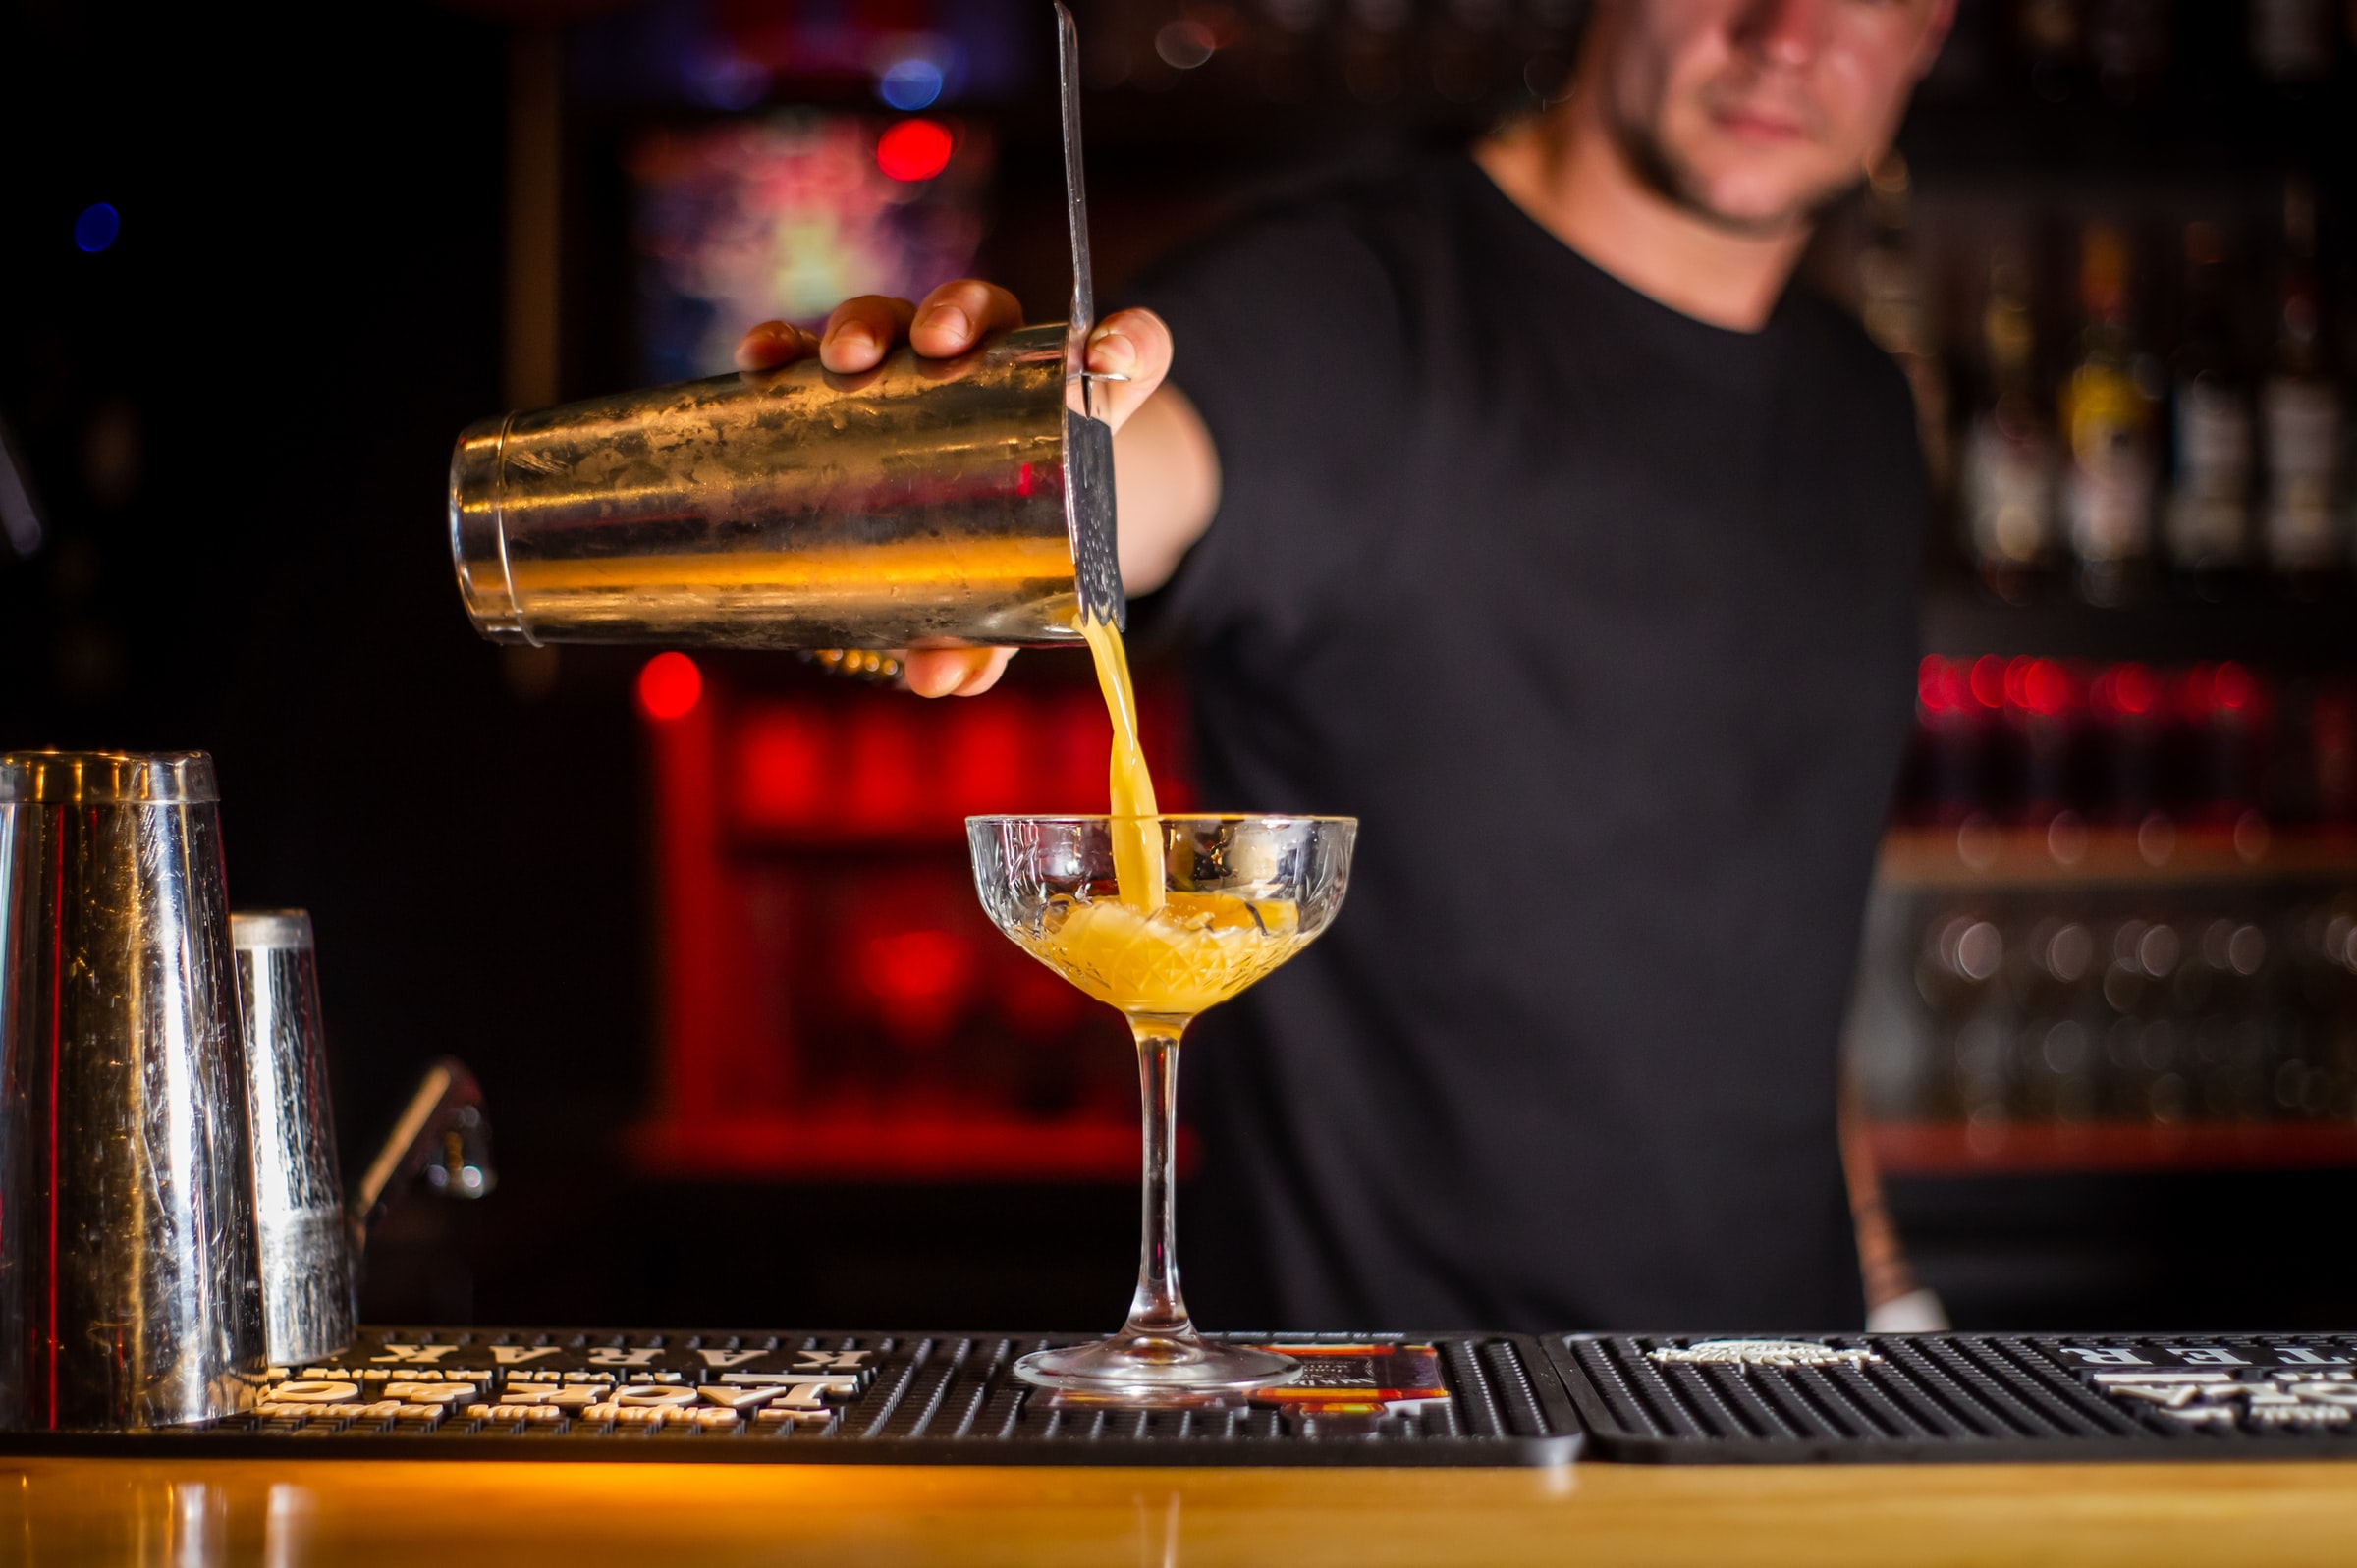 A bartender pours a cocktail from a cocktail shaker into a coupe glass